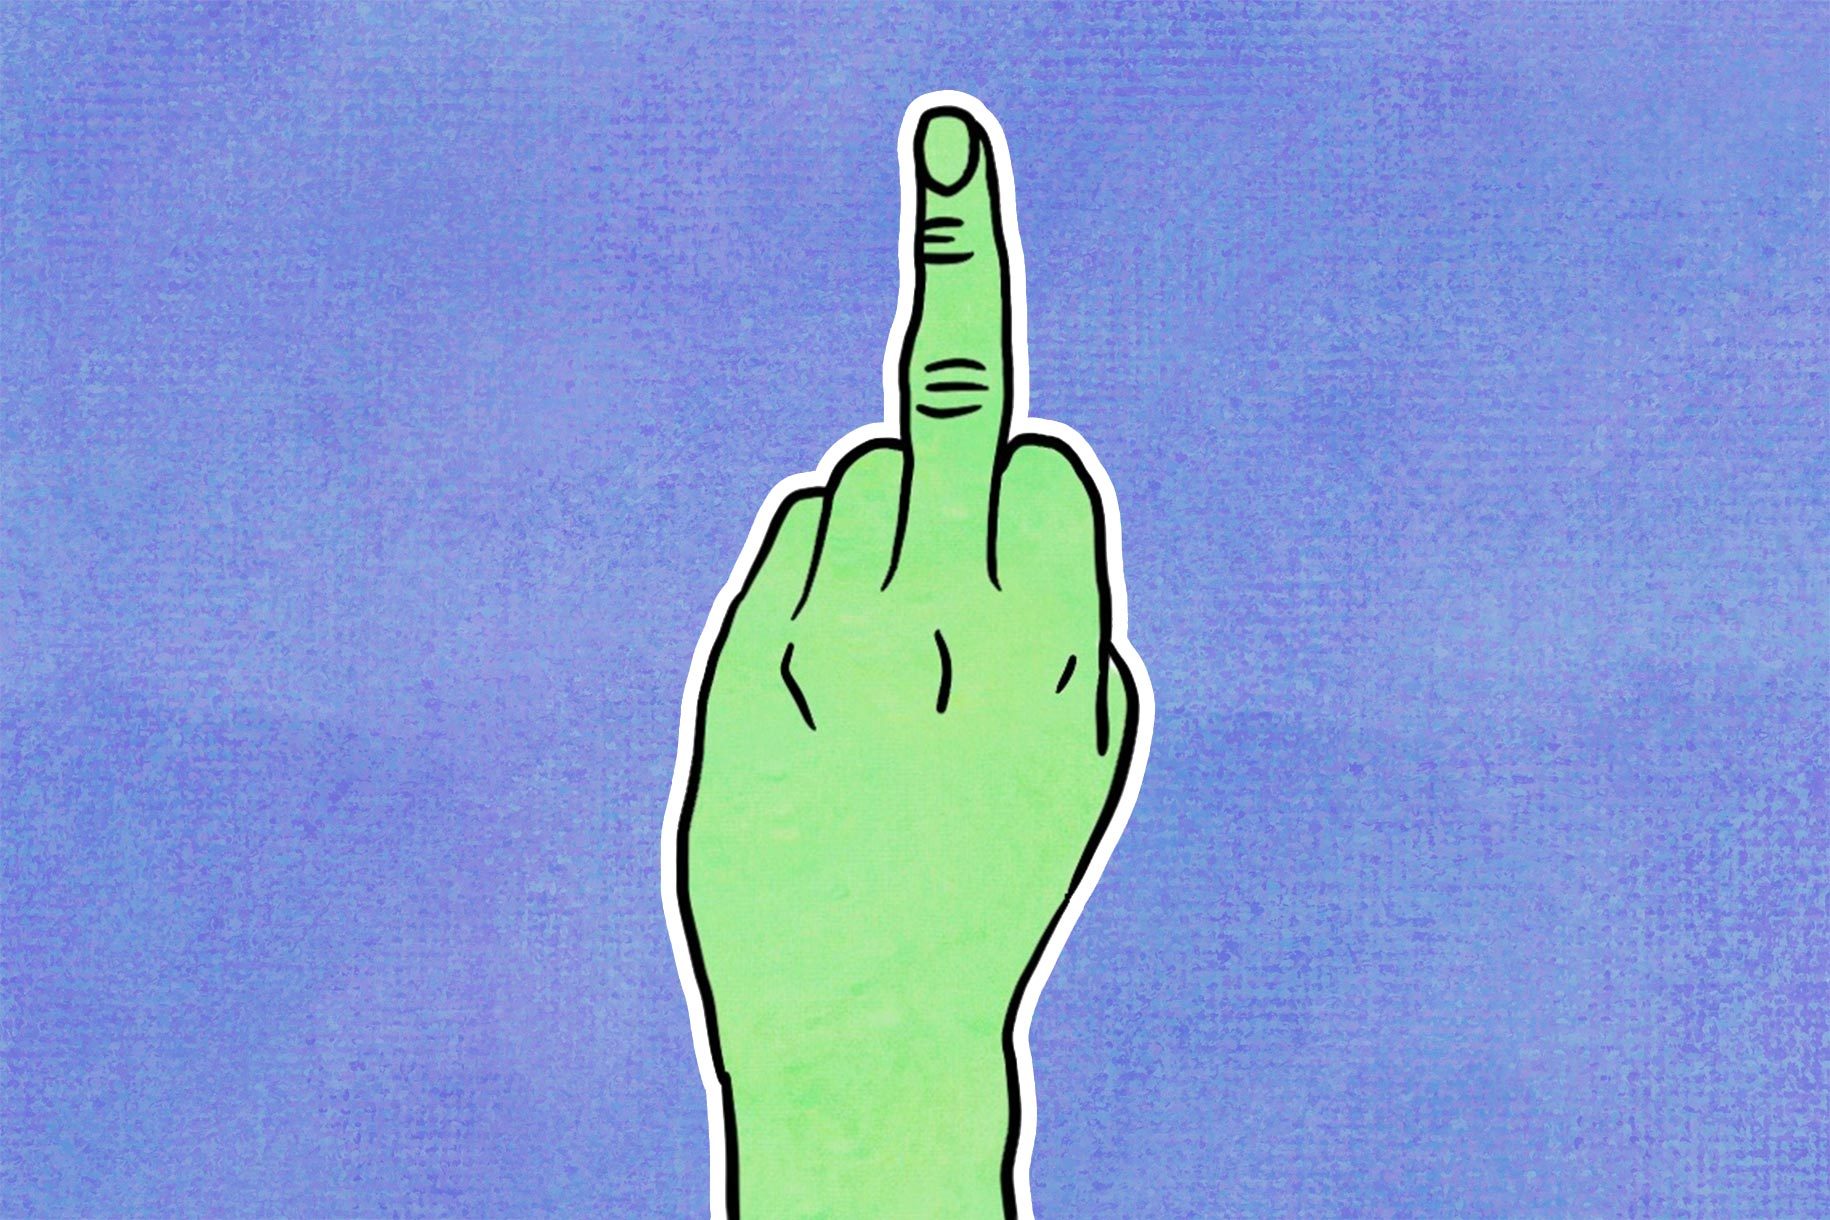 The middle finger